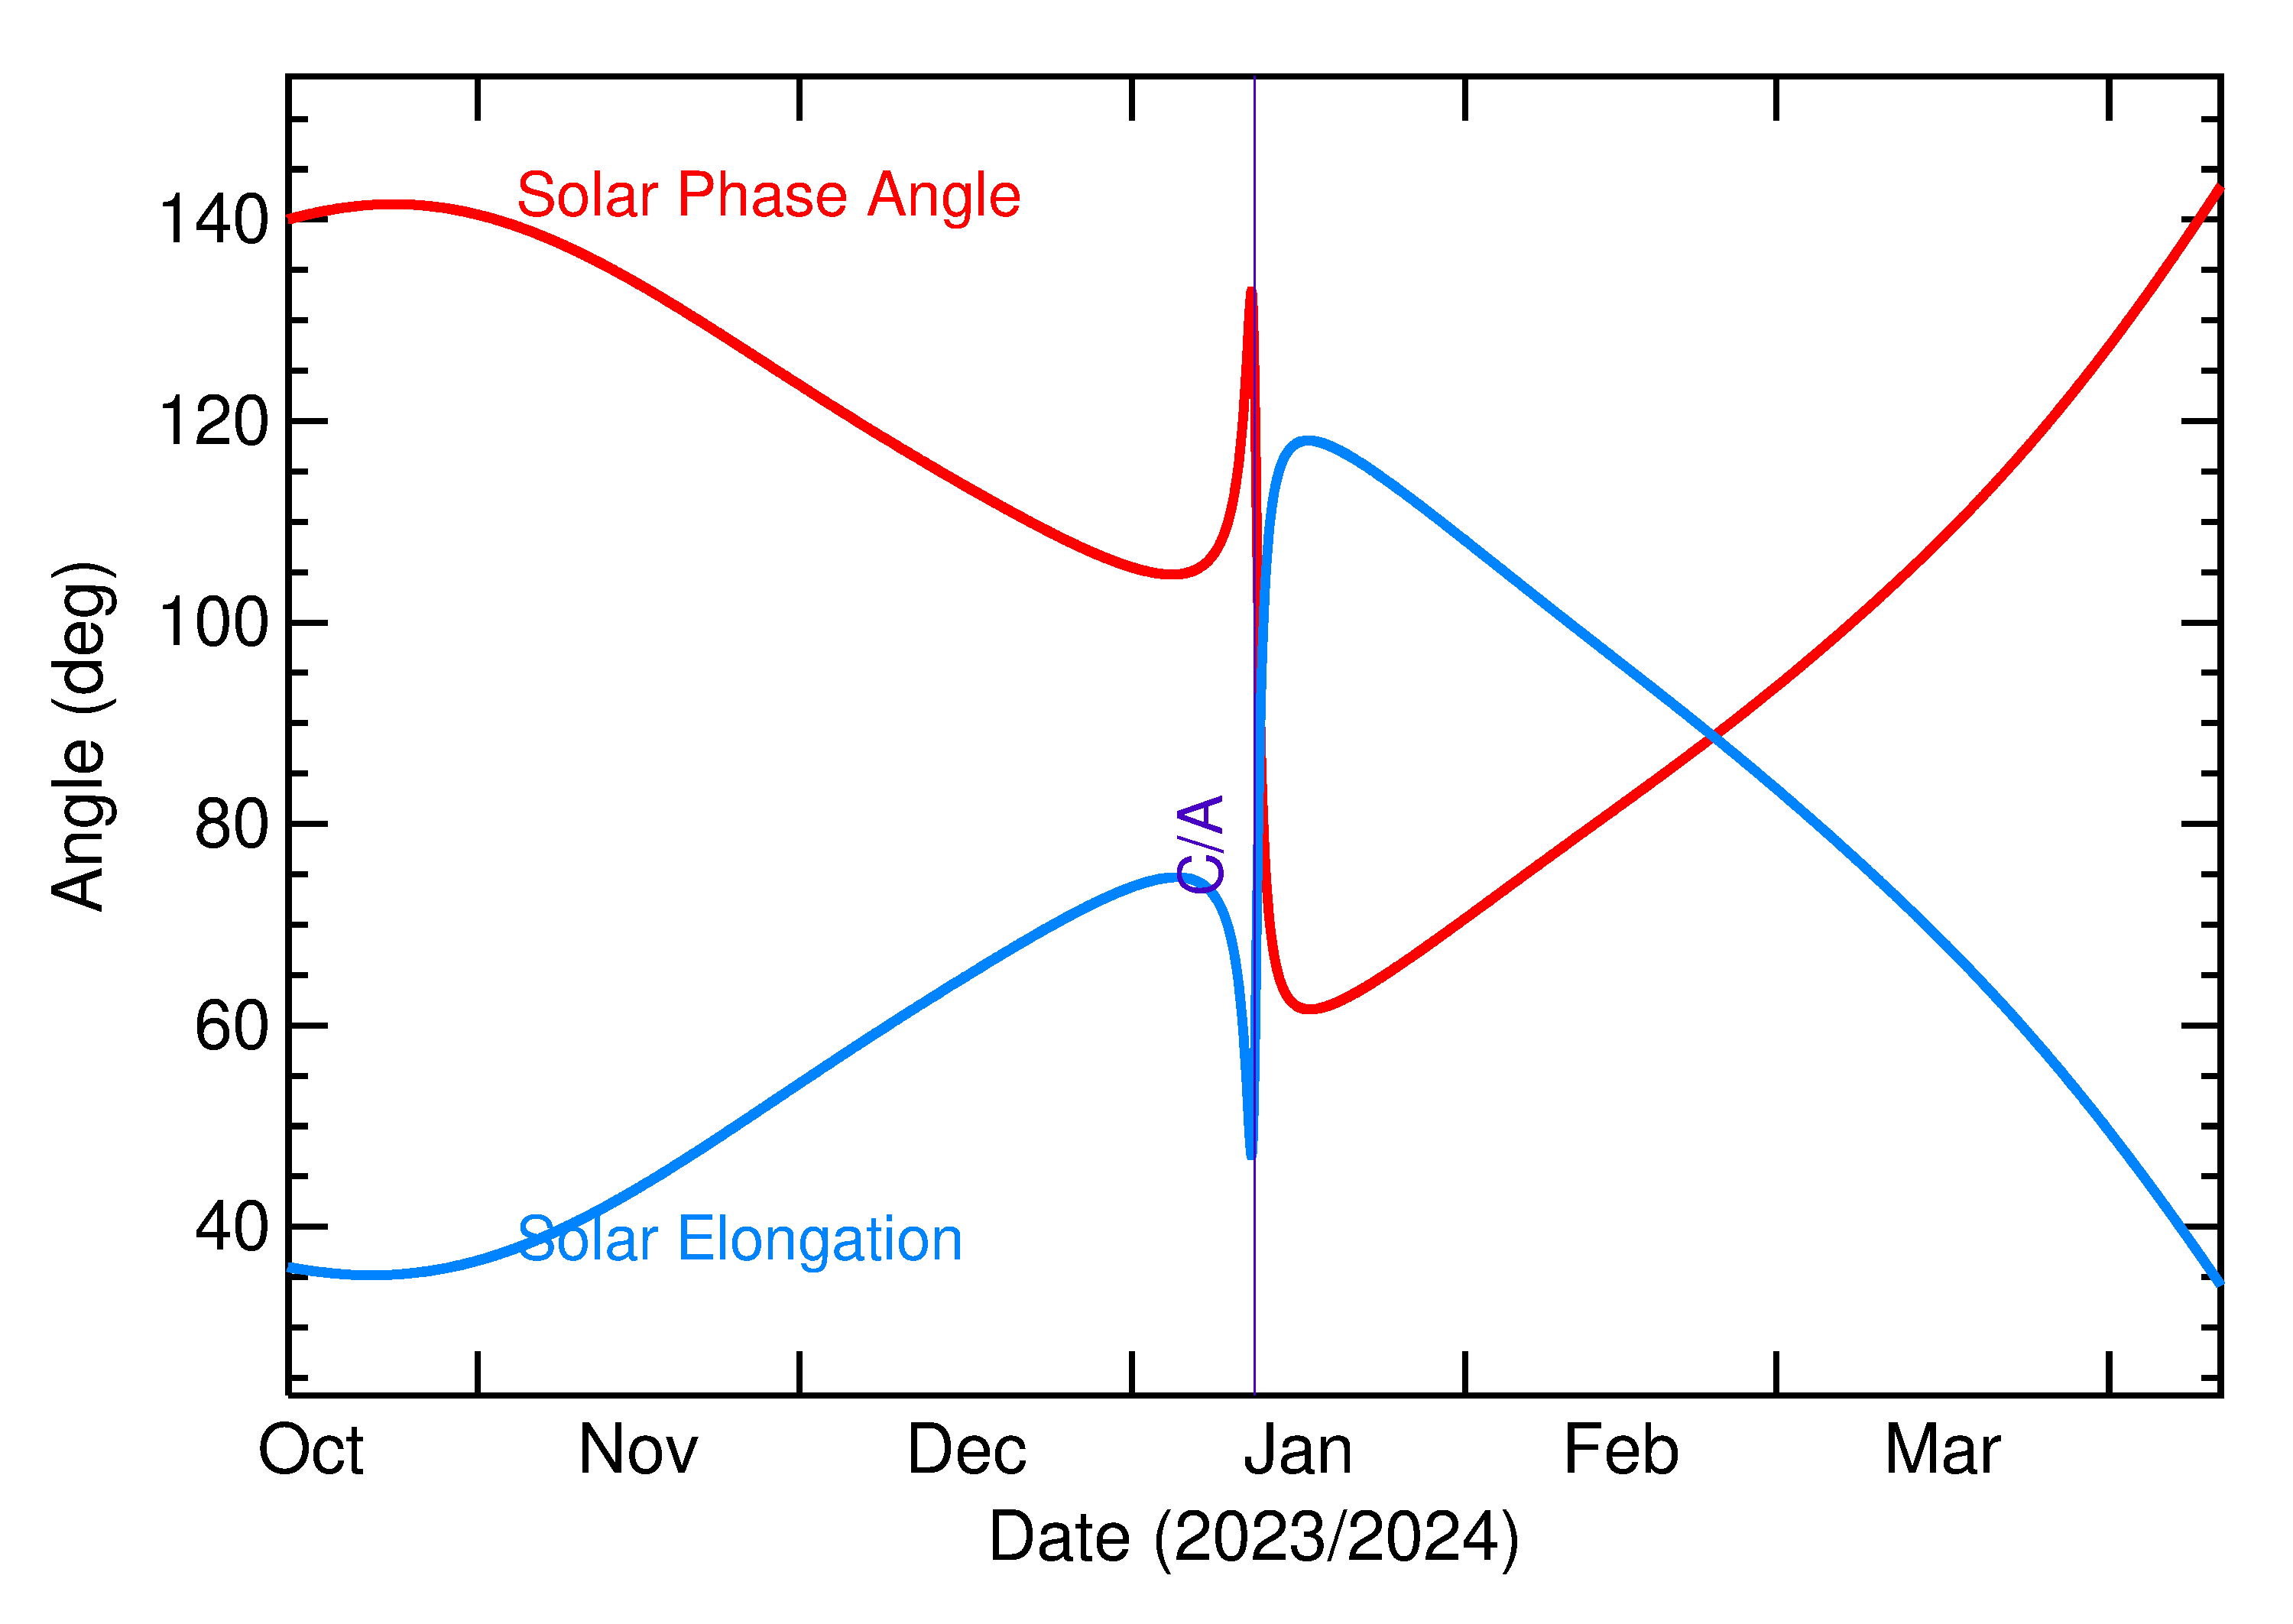 Solar Elongation and Solar Phase Angle of 2024 AM4 in the months around closest approach